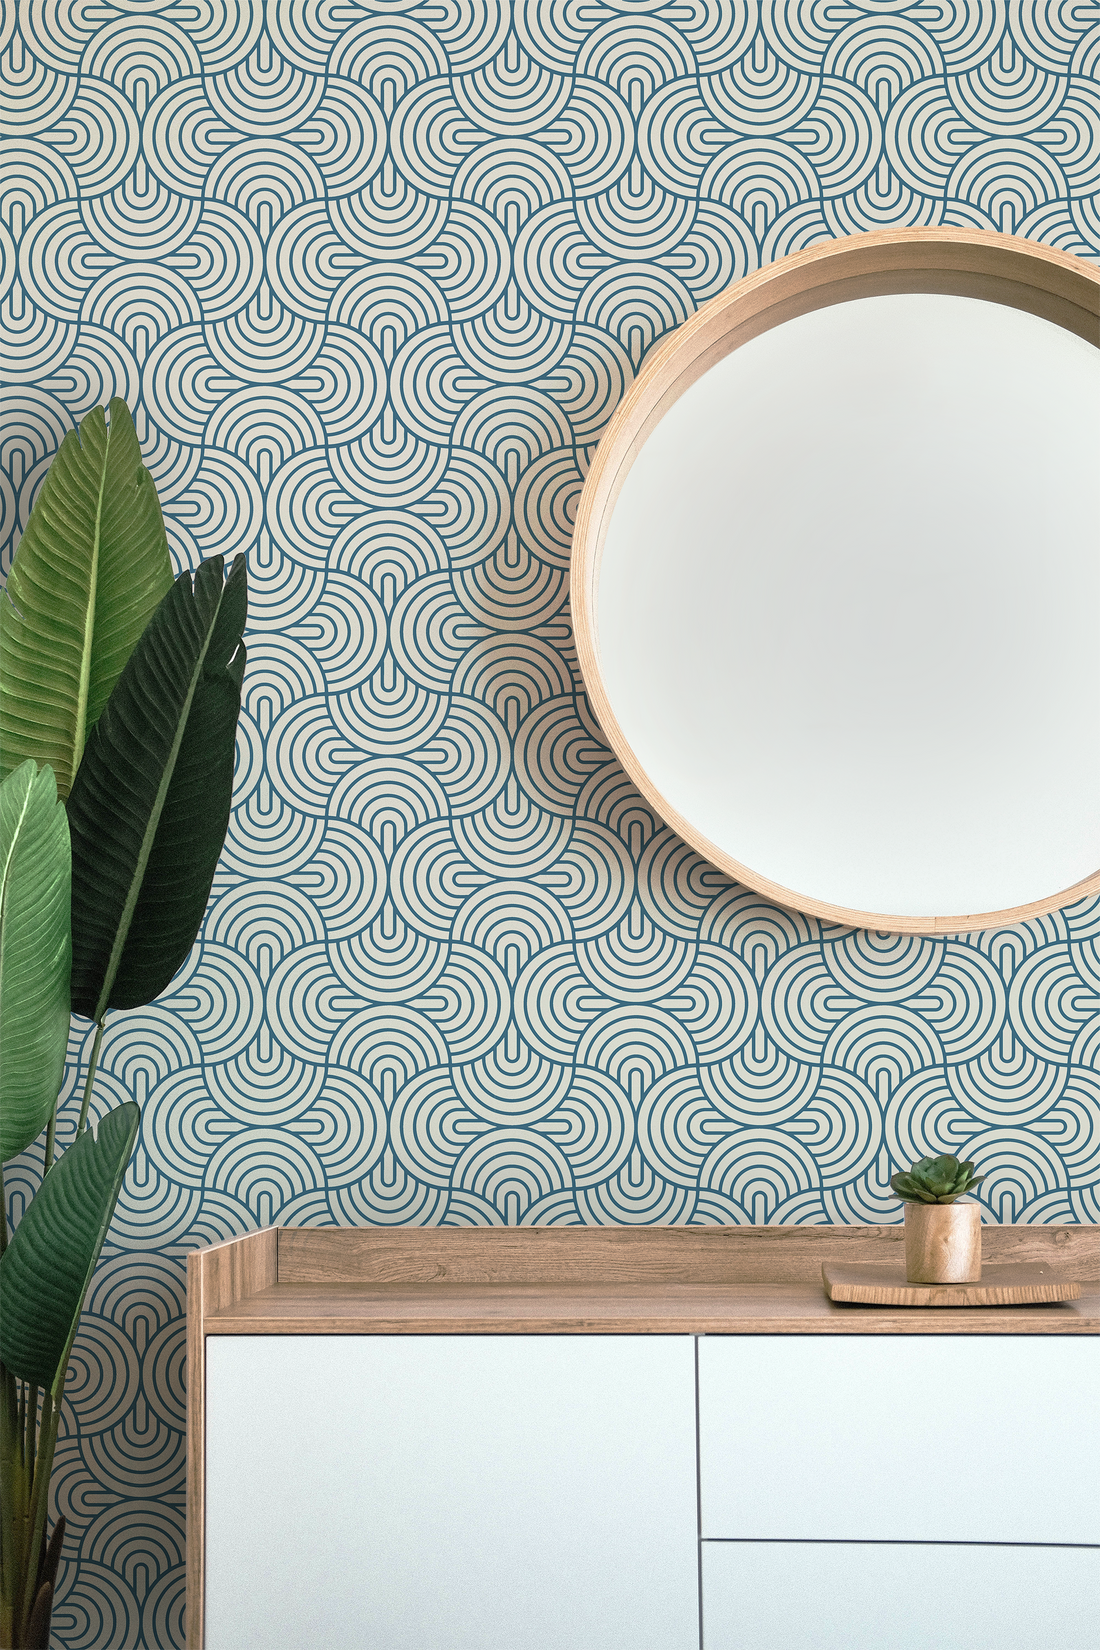 geometric wallpaper in oyster blue with mirror, dresser and plant